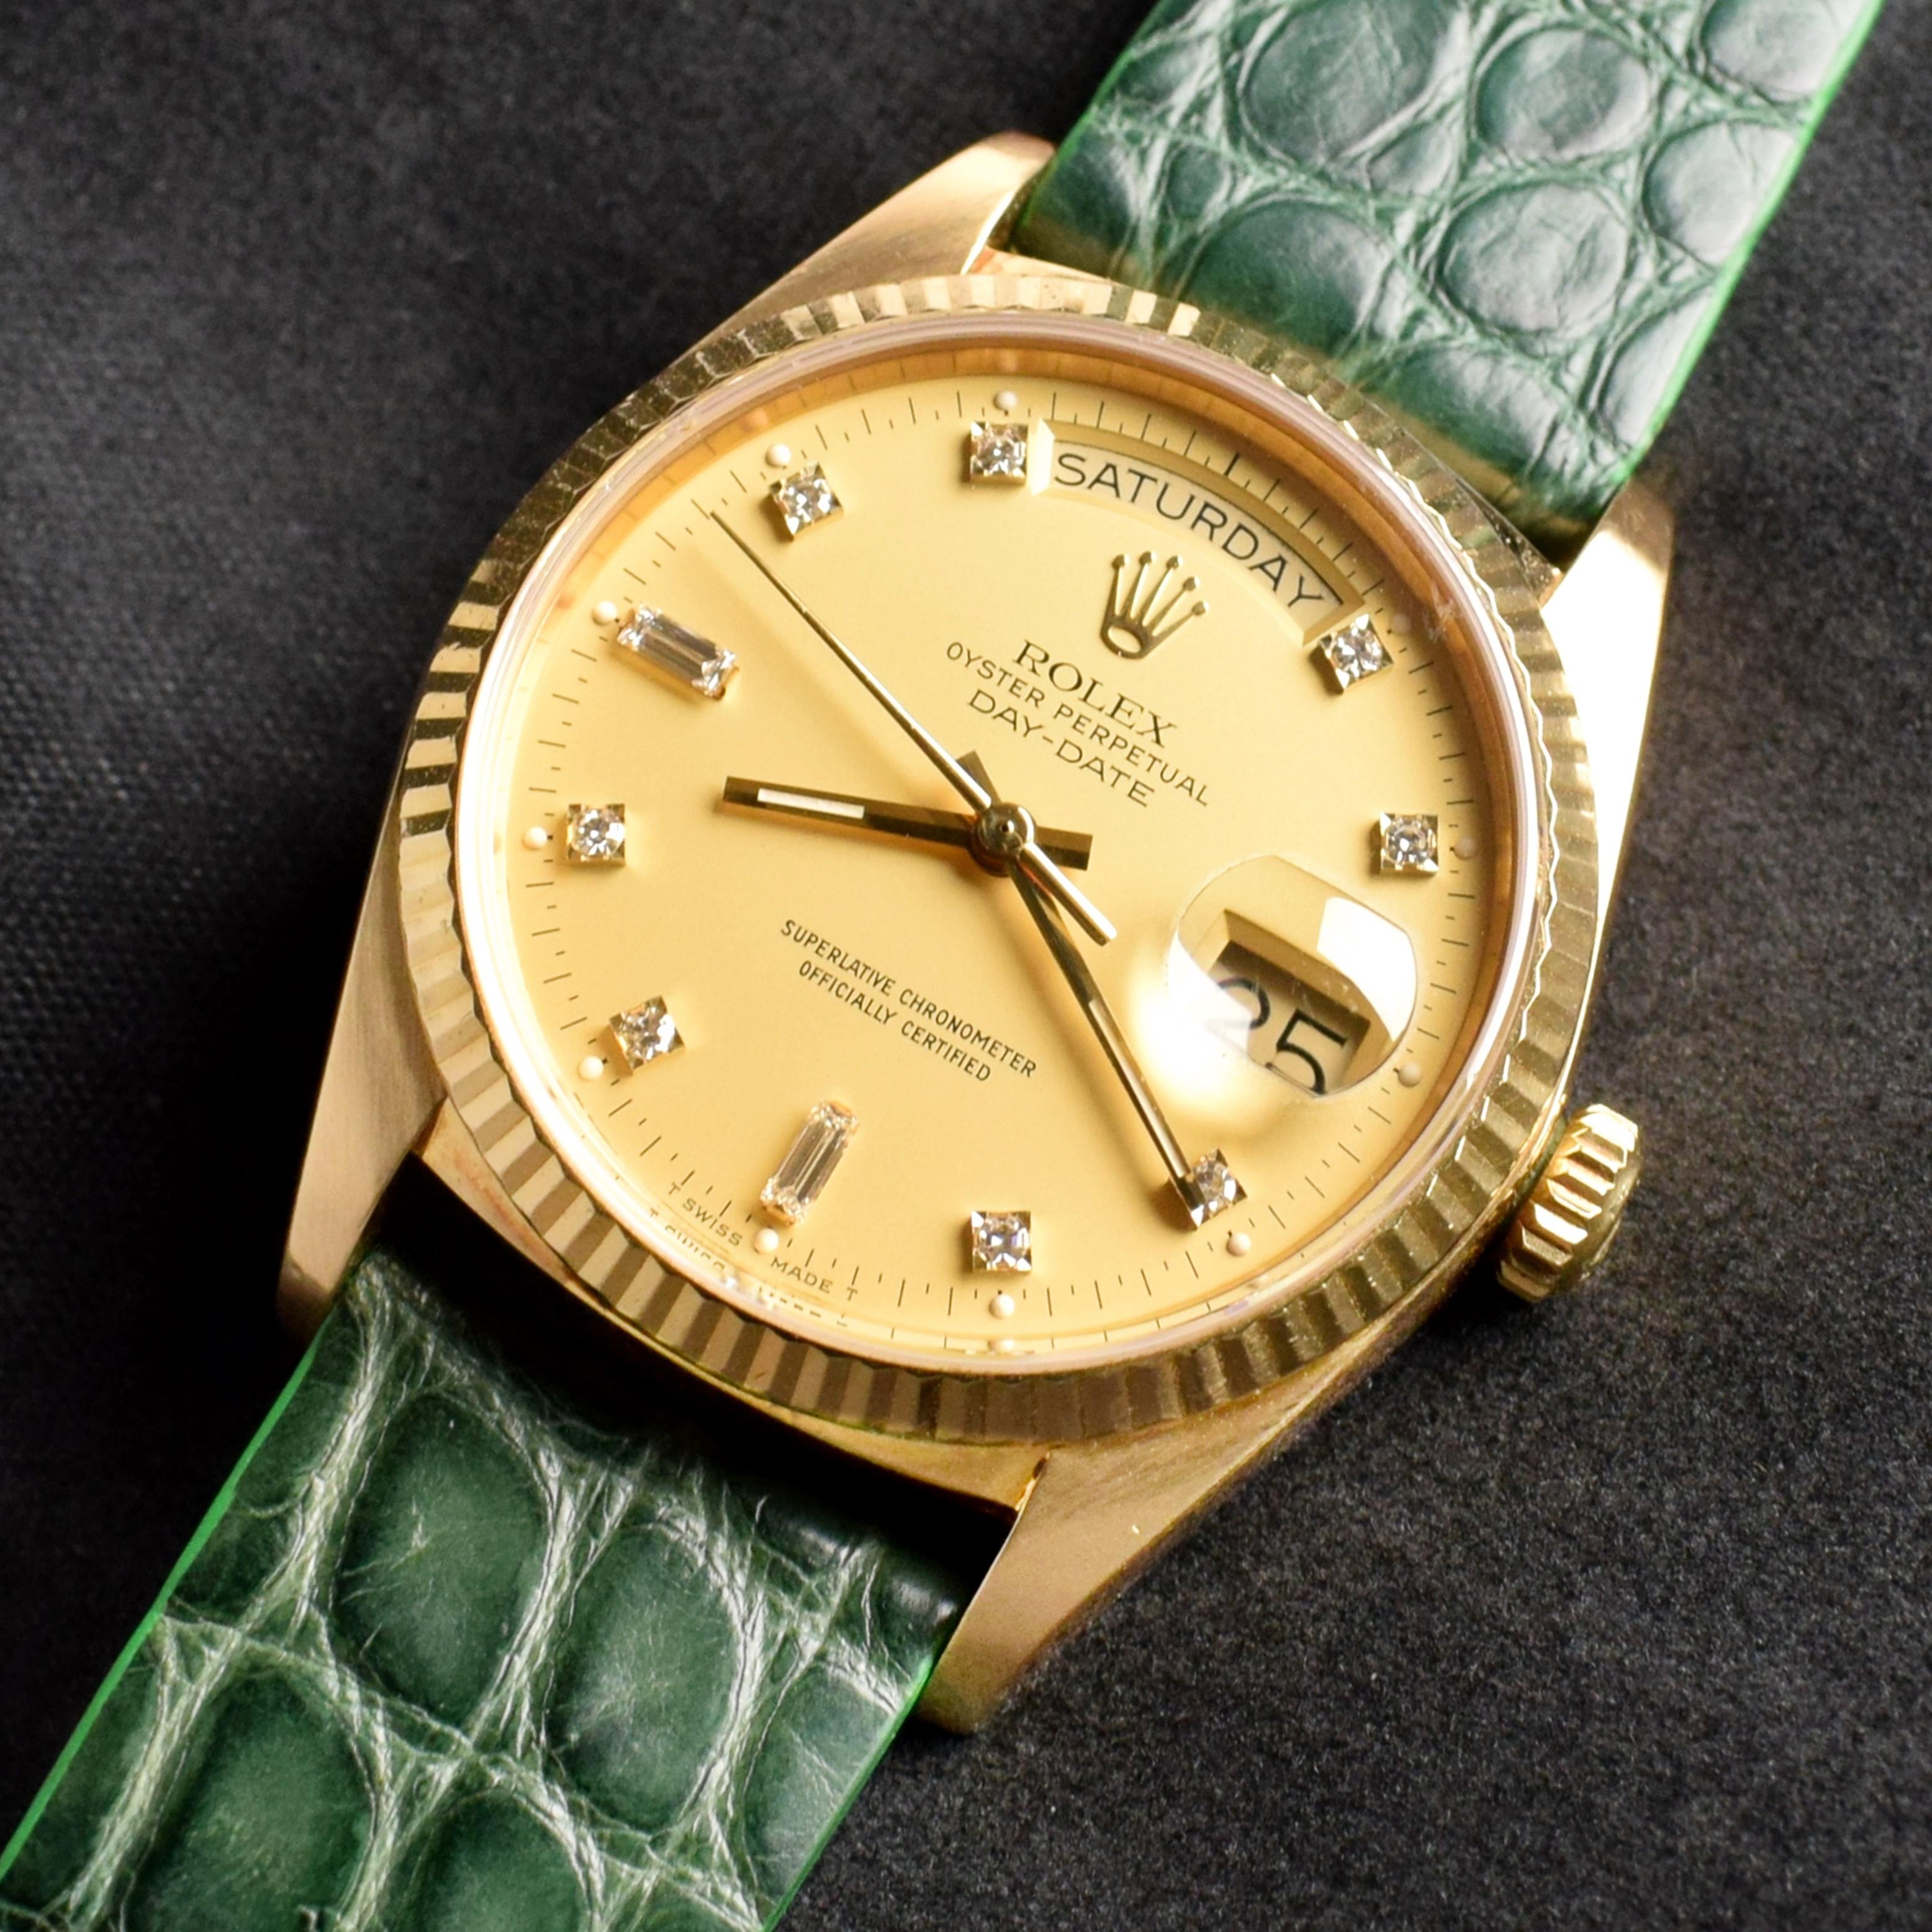 Brand: Vintage Rolex
Model: 18038
Year: 1985
Serial number: 91xxxxx
Reference: C03702
Case: 36mm without crown; Show sign of wear with slight polish from previous; inner case back stamped 18000
Dial: Excellent Condition Champagne Dial w/ diamond